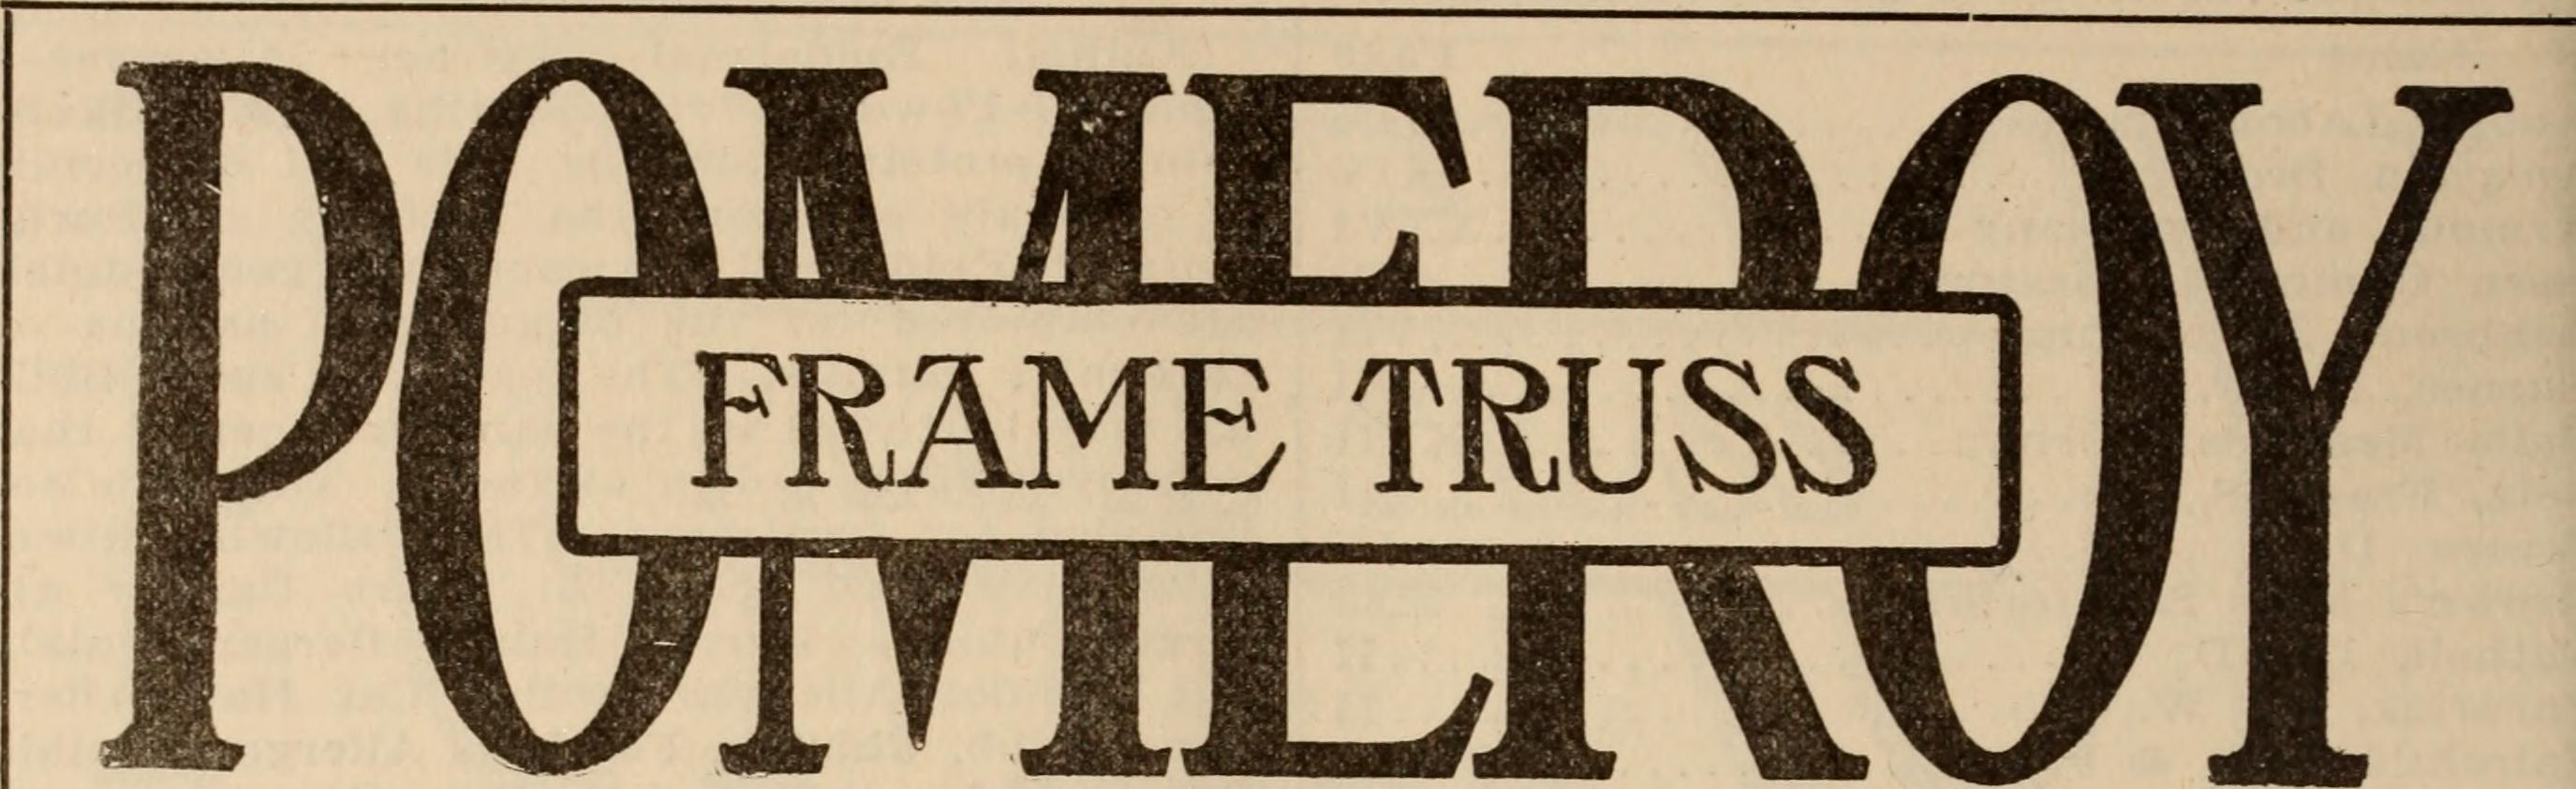 Image from page 461 of "Journal of the Medical Society of New Jersey" (1922)